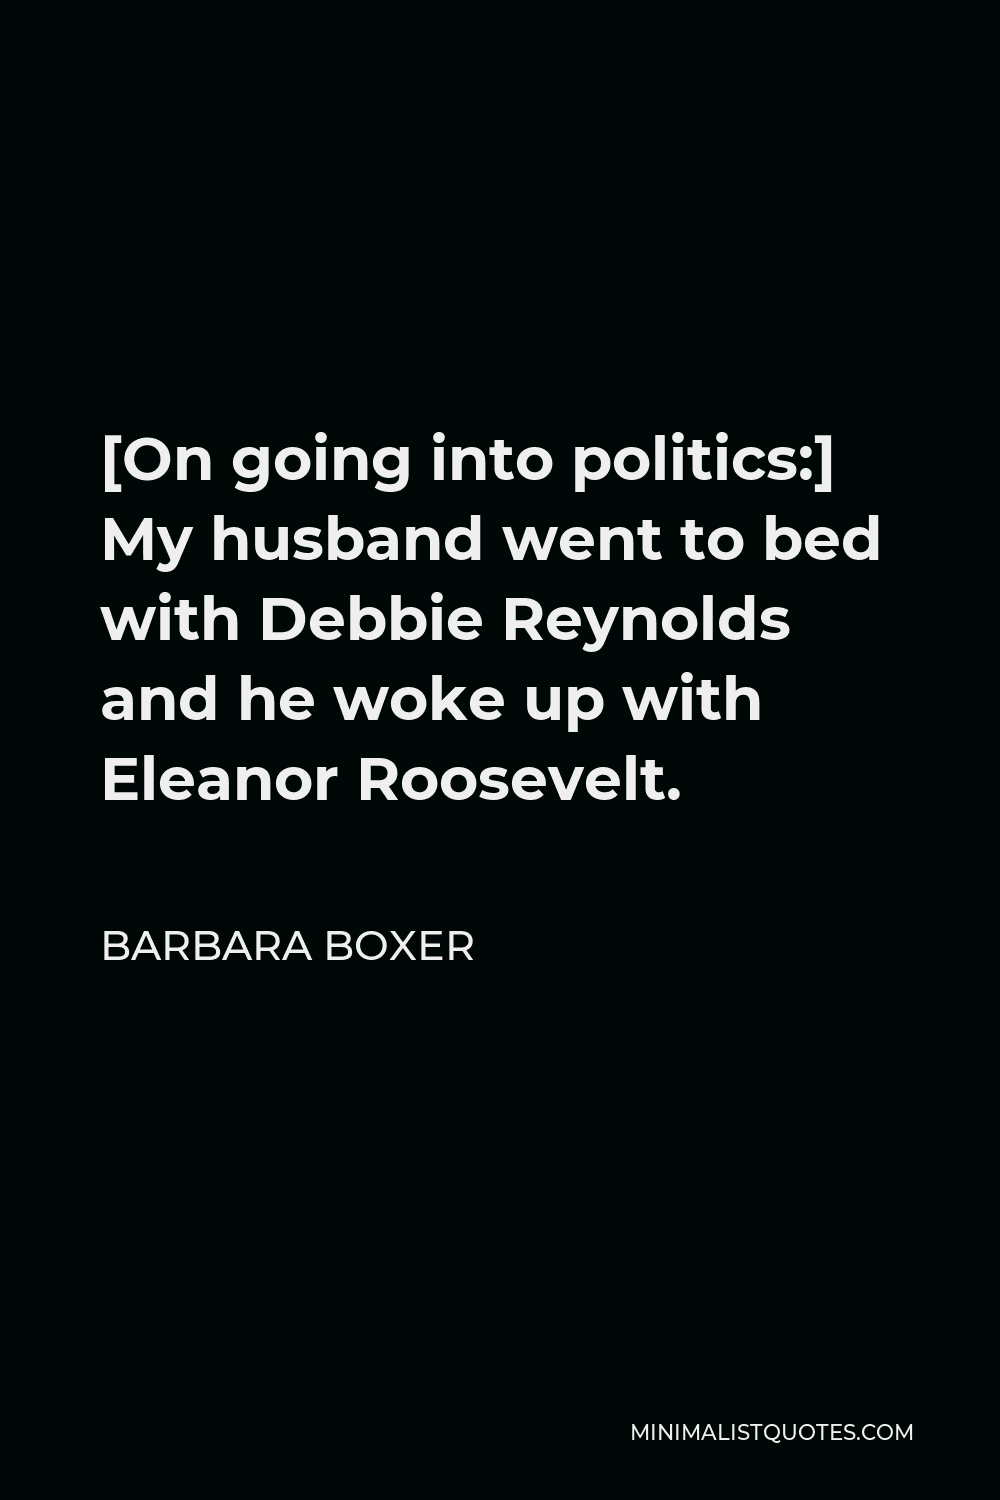 Barbara Boxer Quote - [On going into politics:] My husband went to bed with Debbie Reynolds and he woke up with Eleanor Roosevelt.